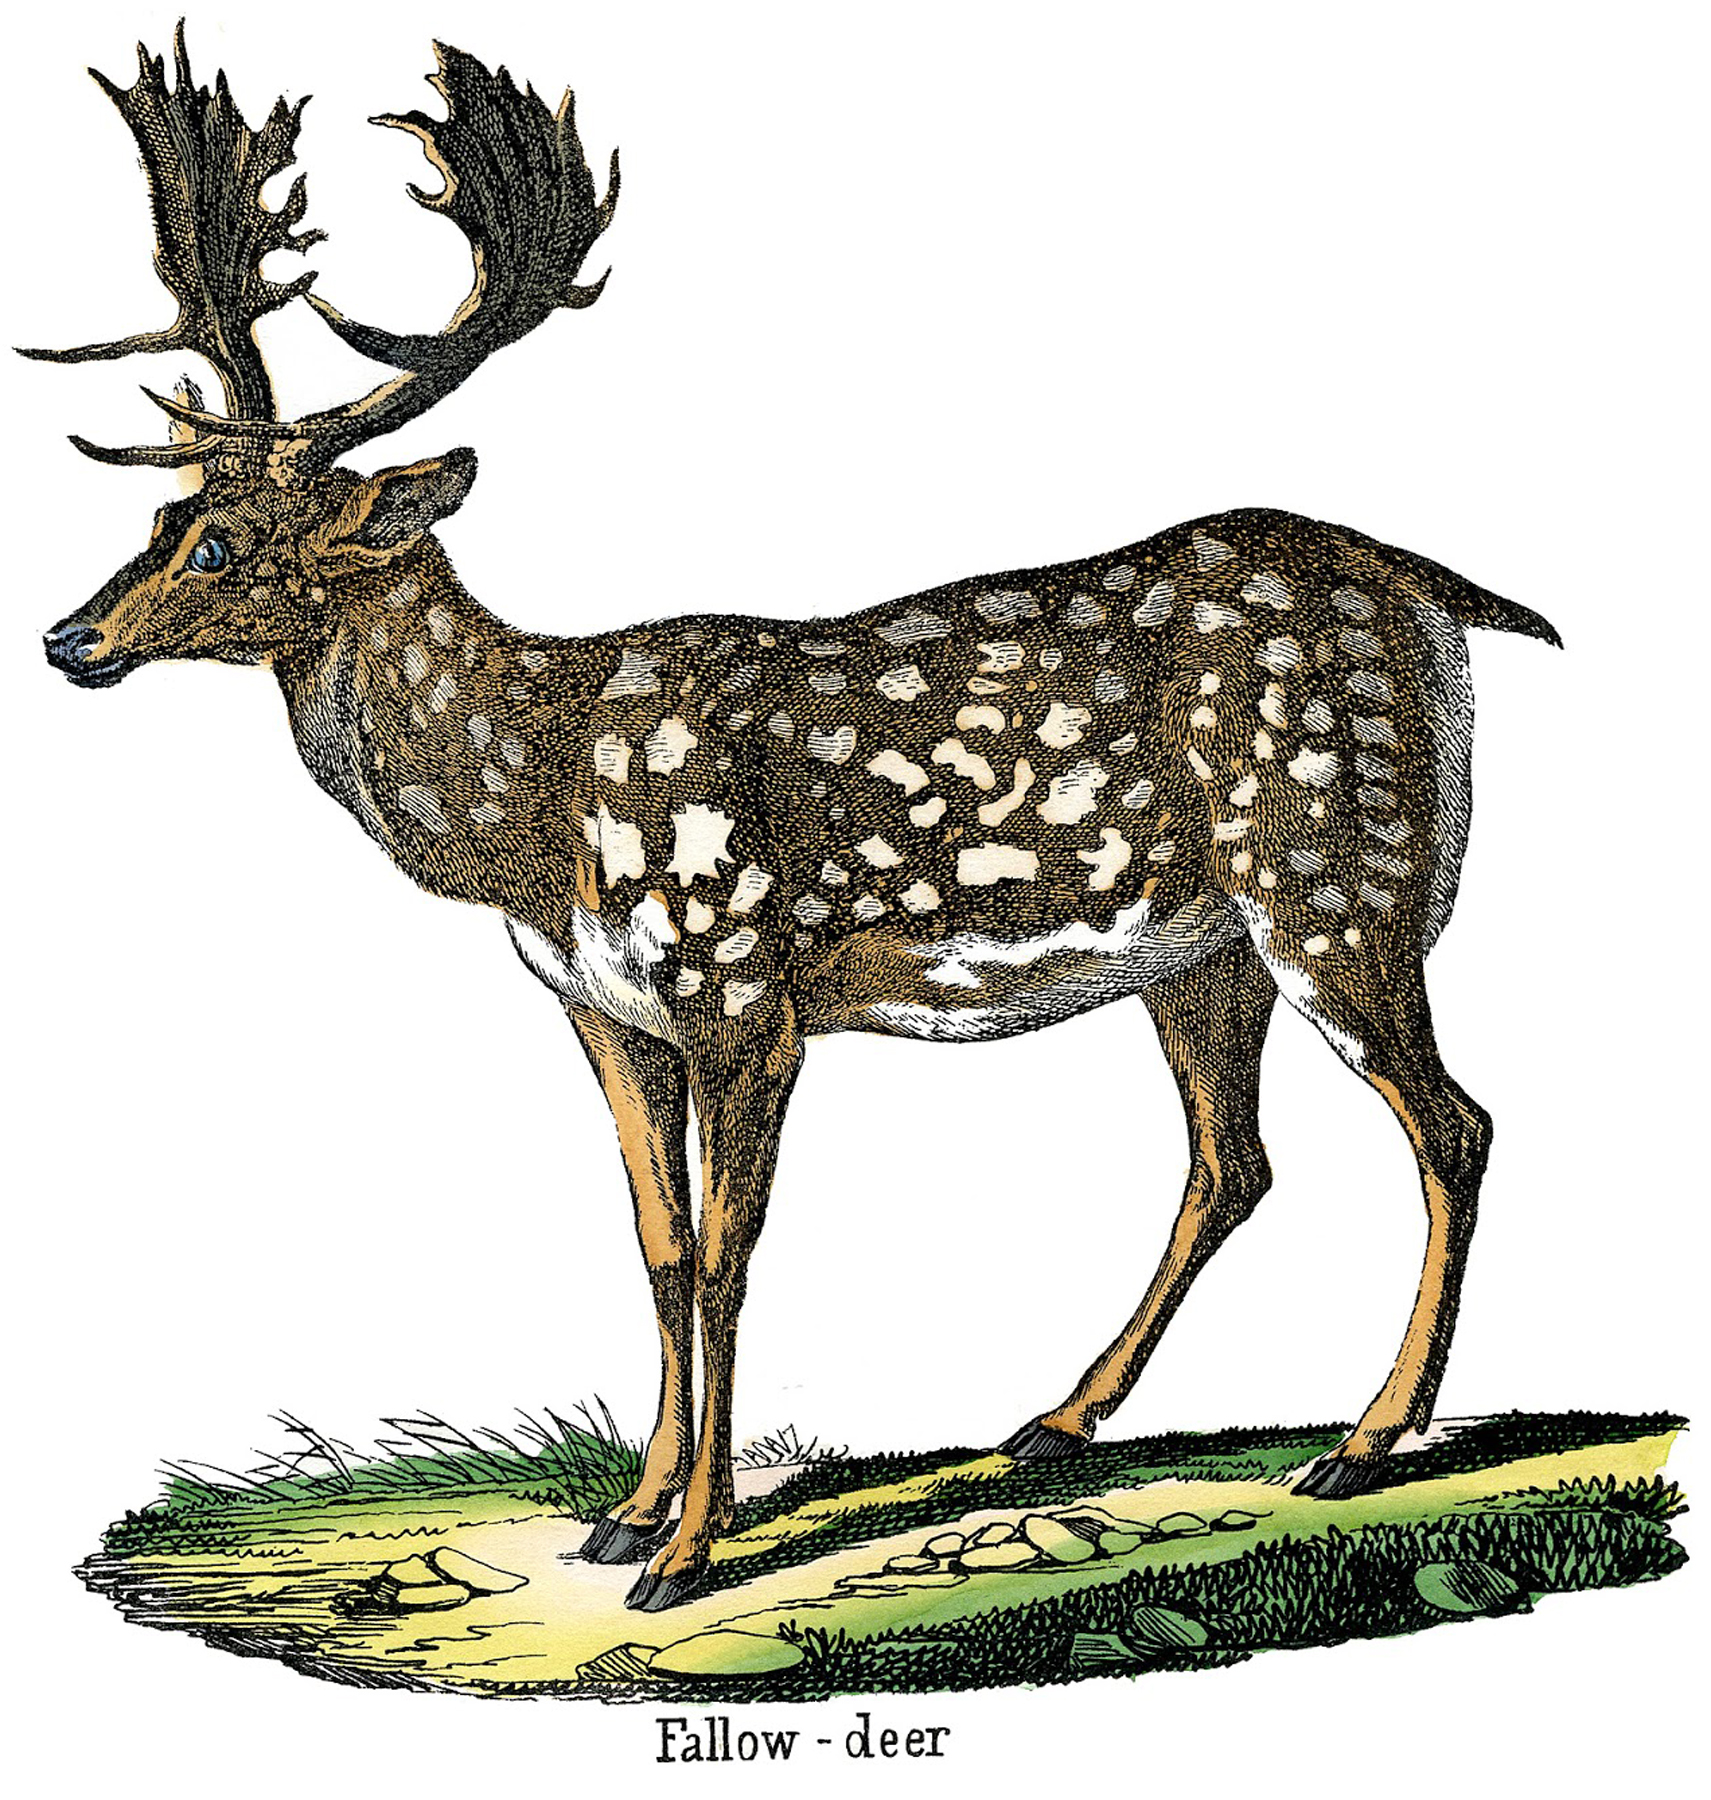 Spotted Fallow Deer Image